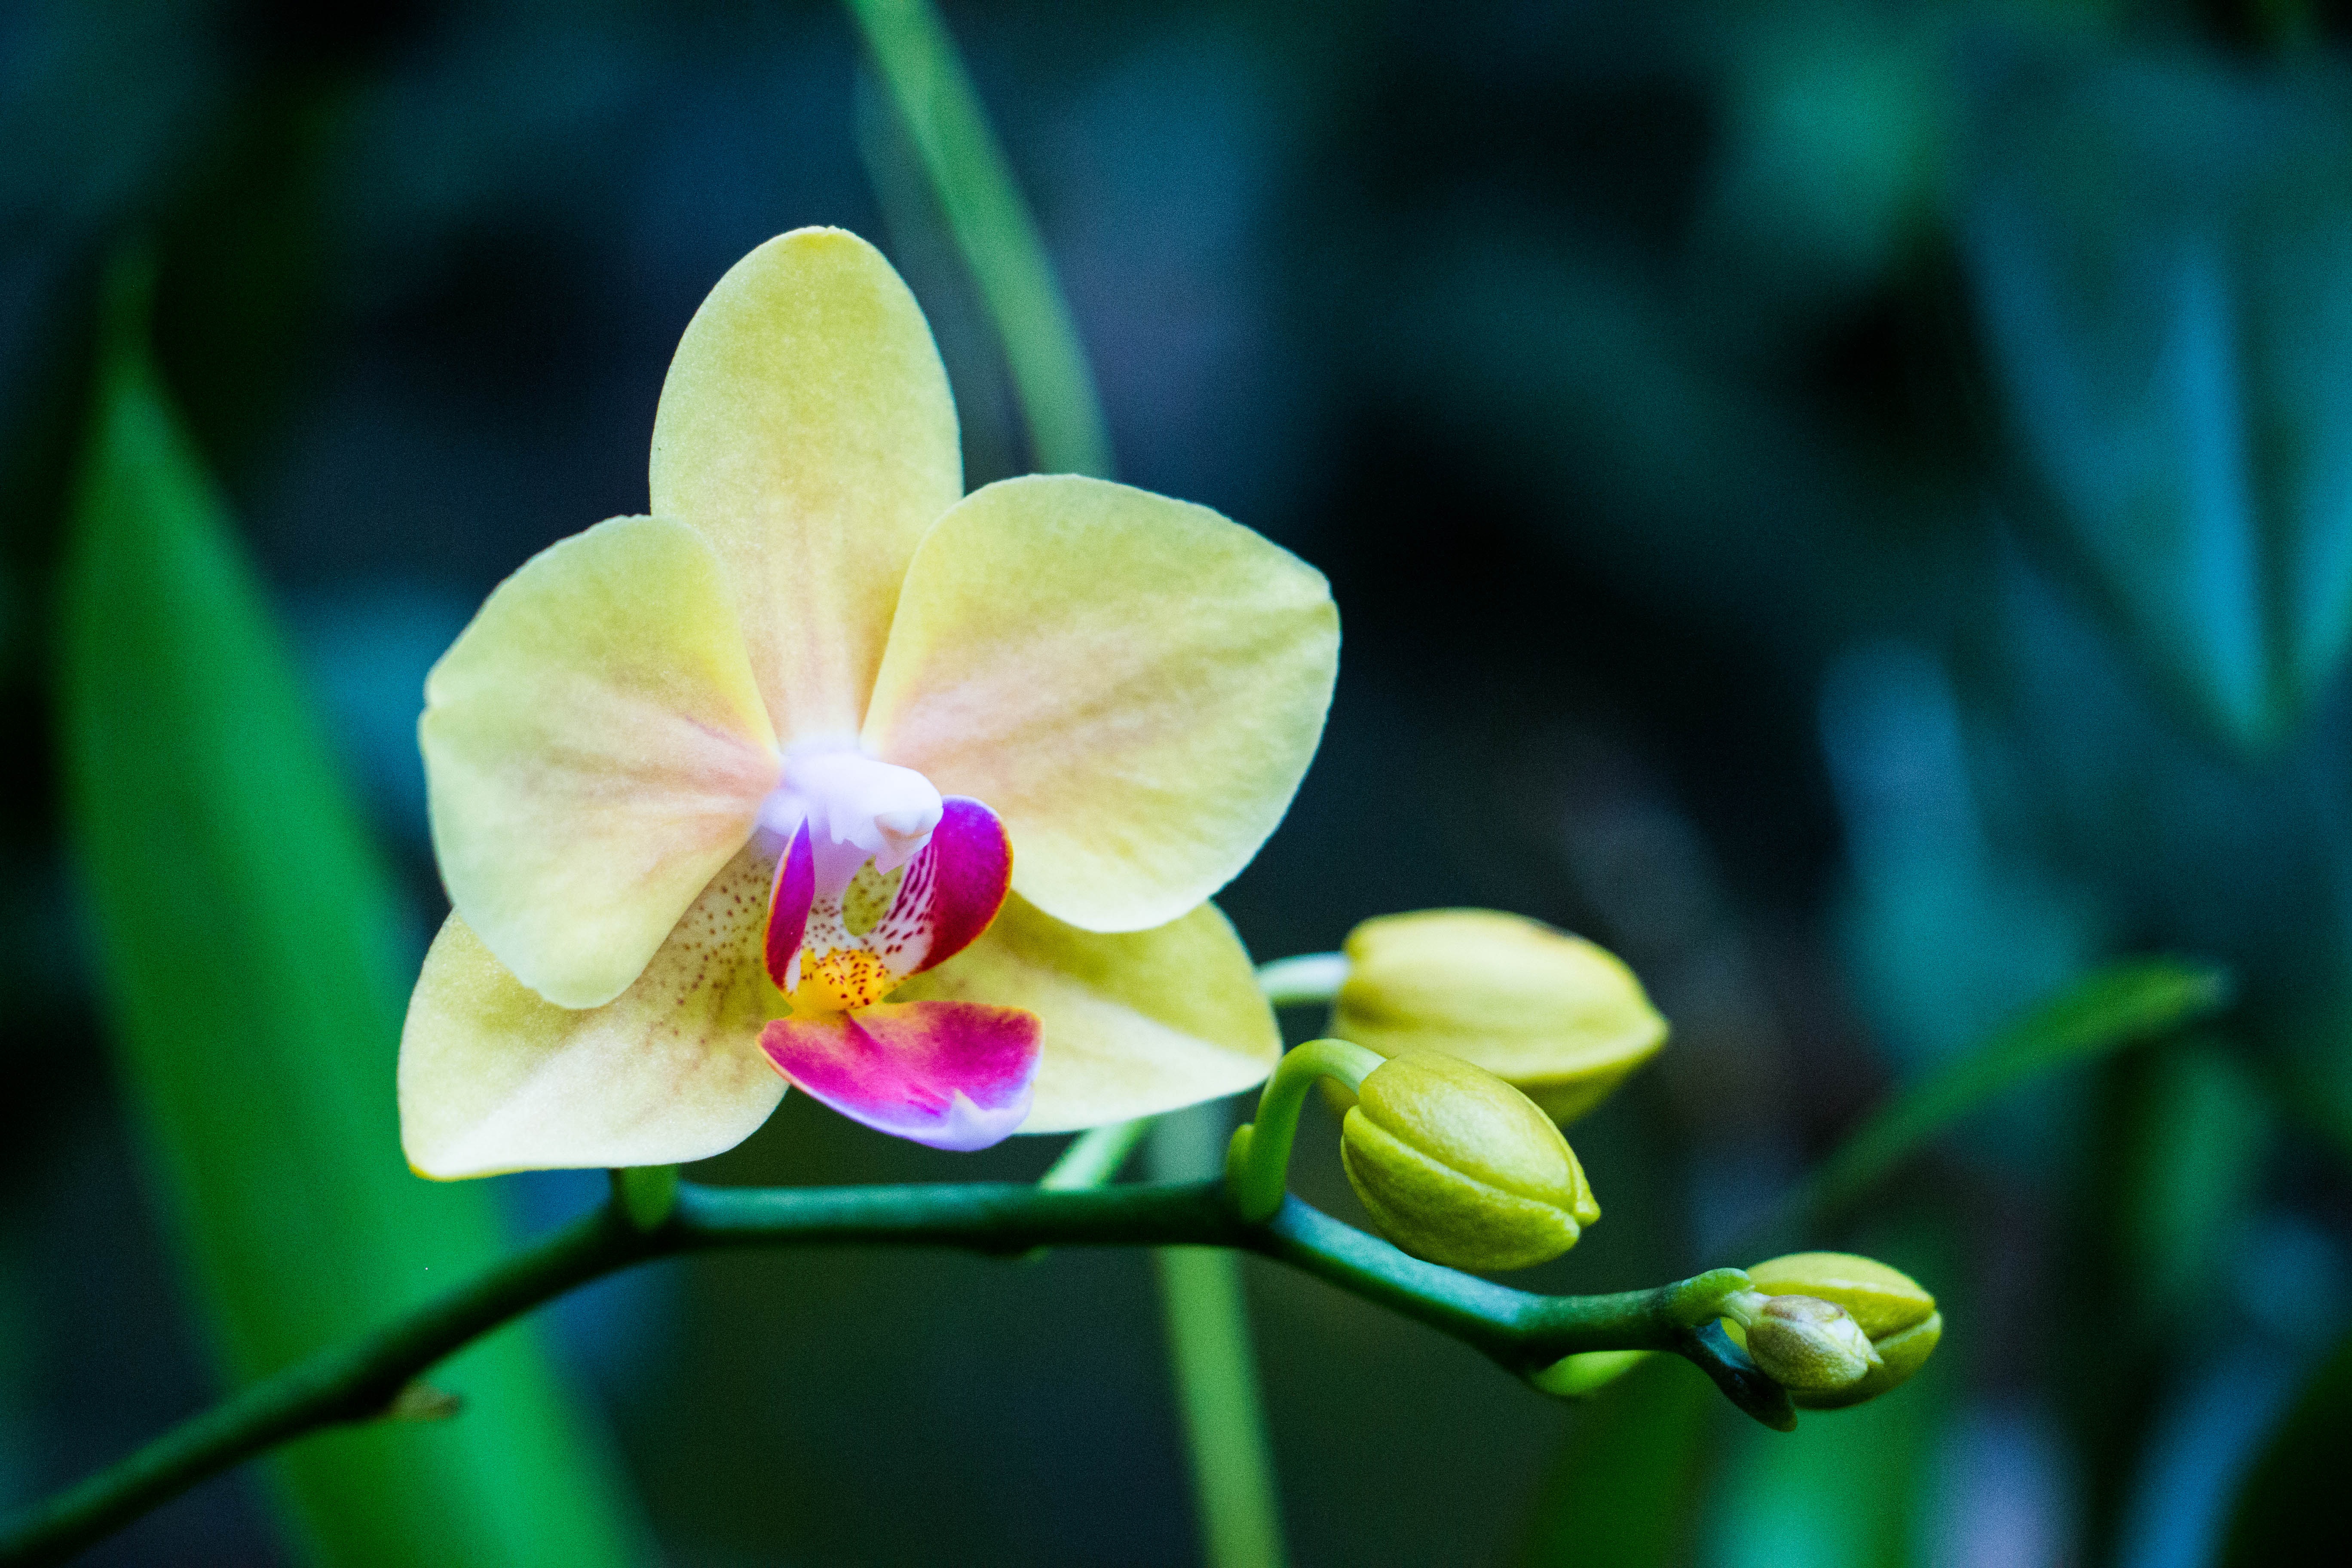 Orchid Flower Bud Wallpaper Hd Flowers 4k Wallpapers Images Photos